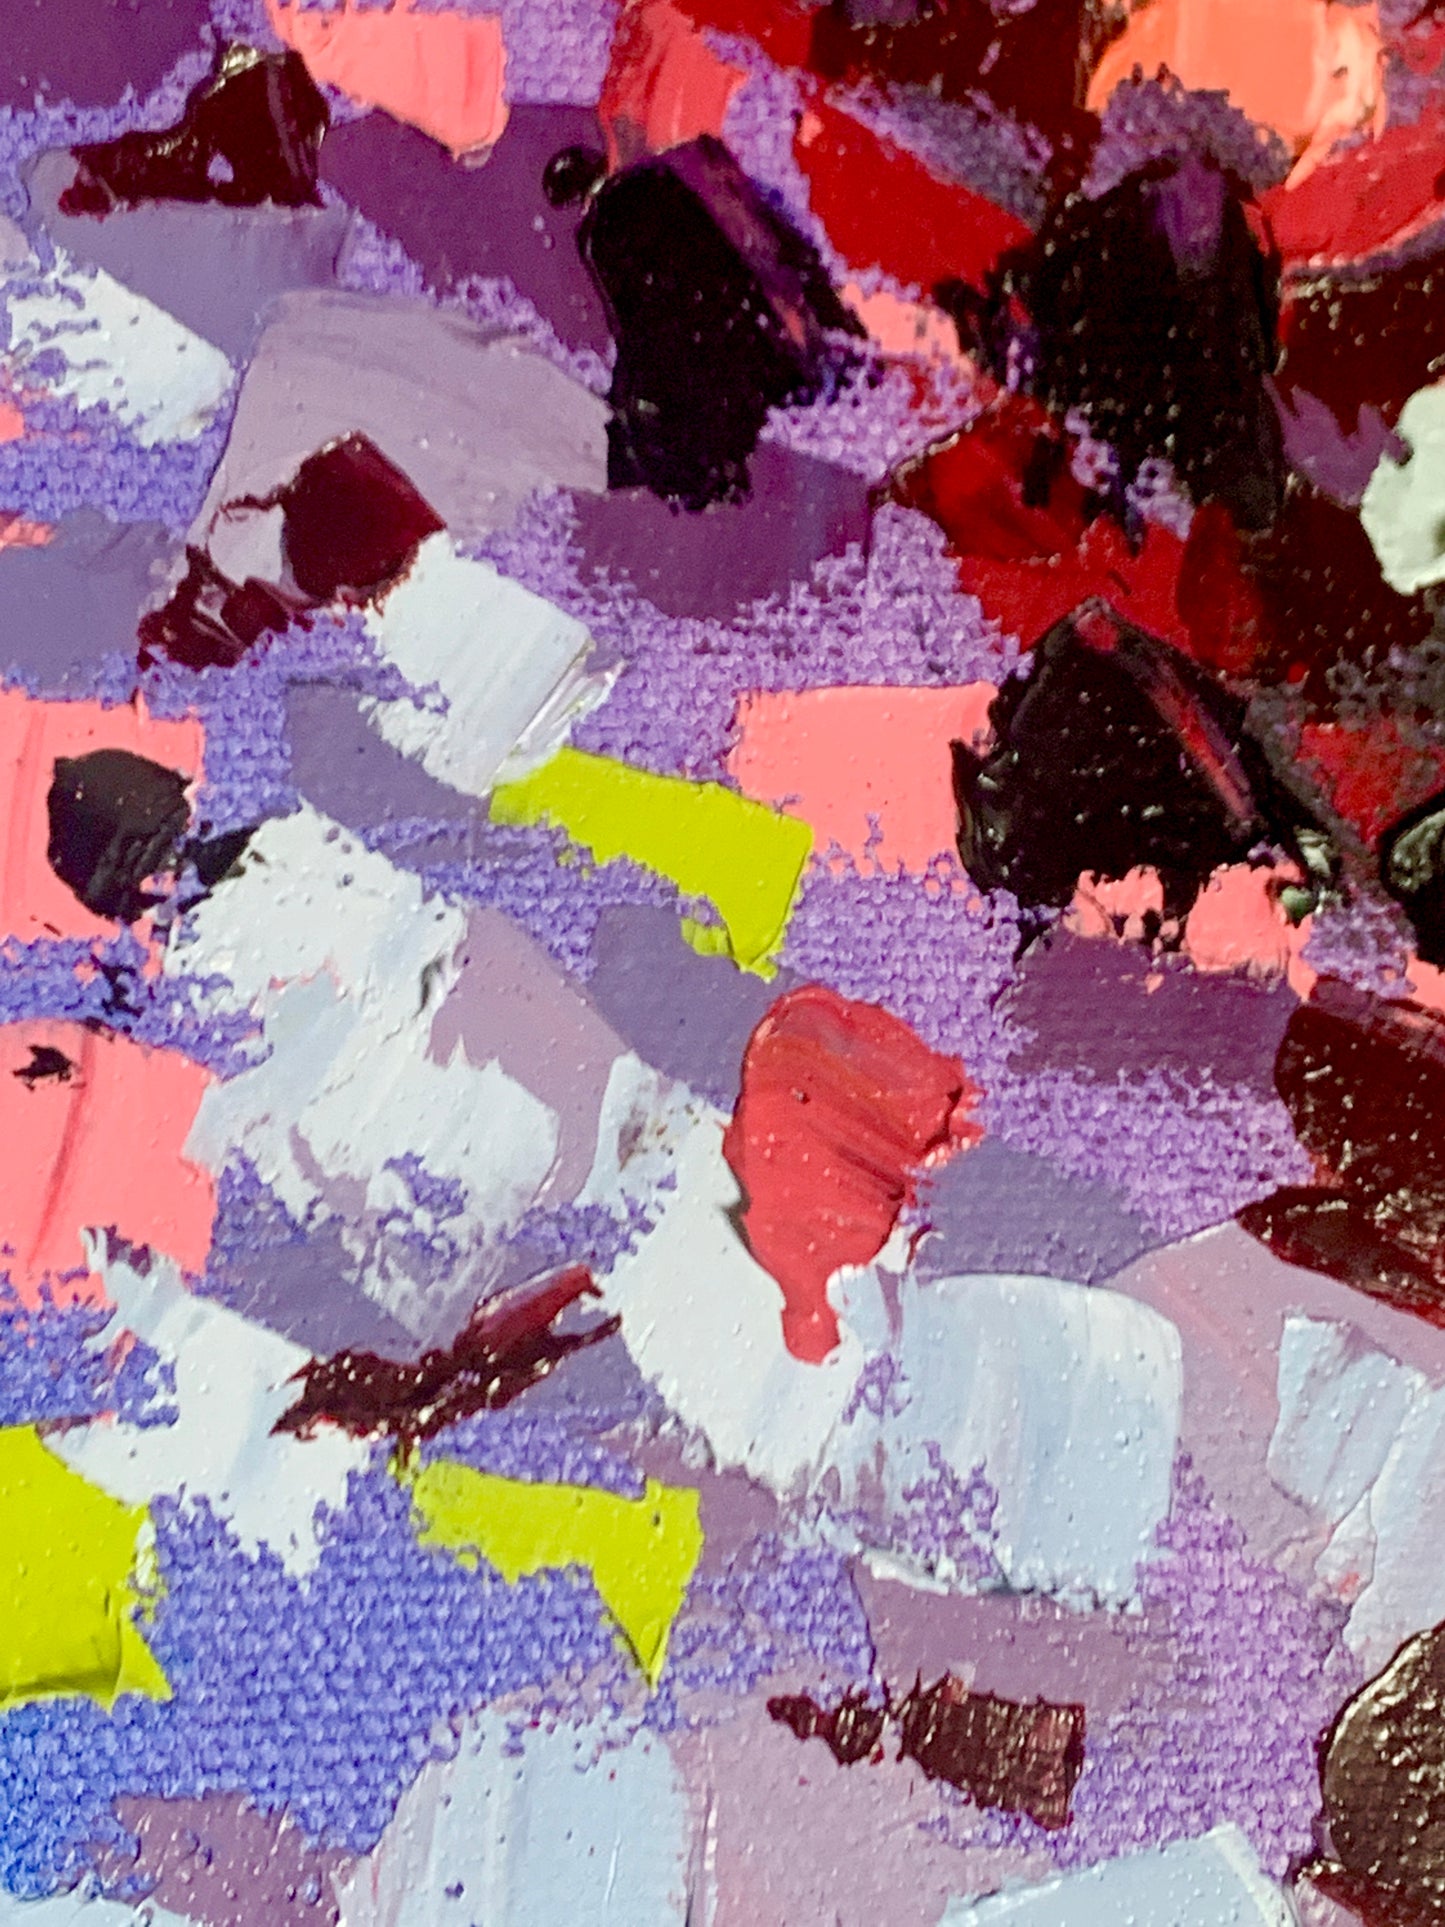 Close up texture of the purple area of the painting